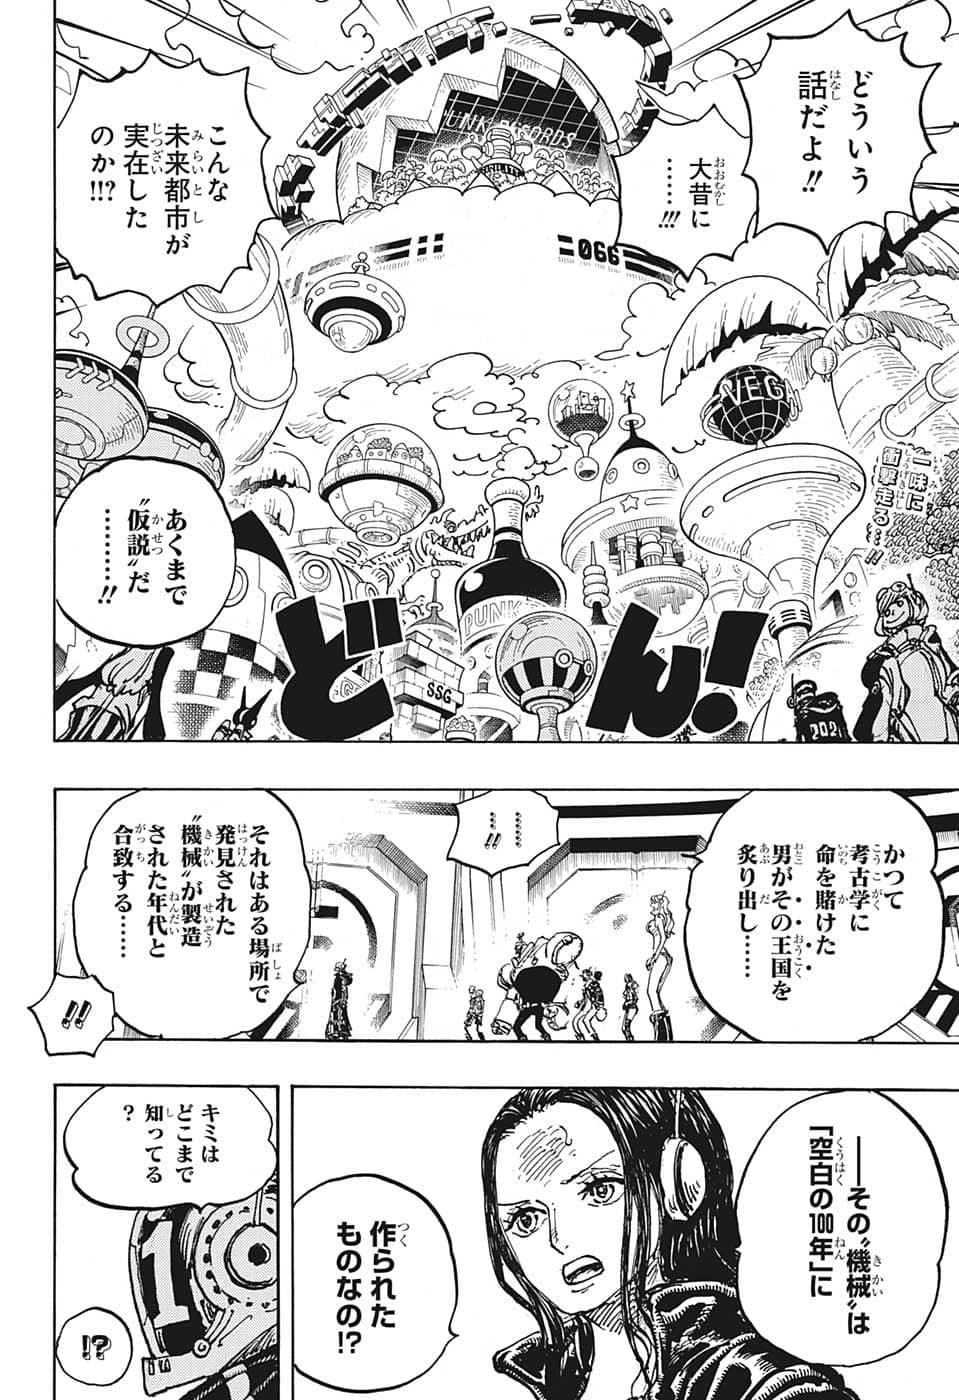 One Piece - Chapter 1066 - Page 2